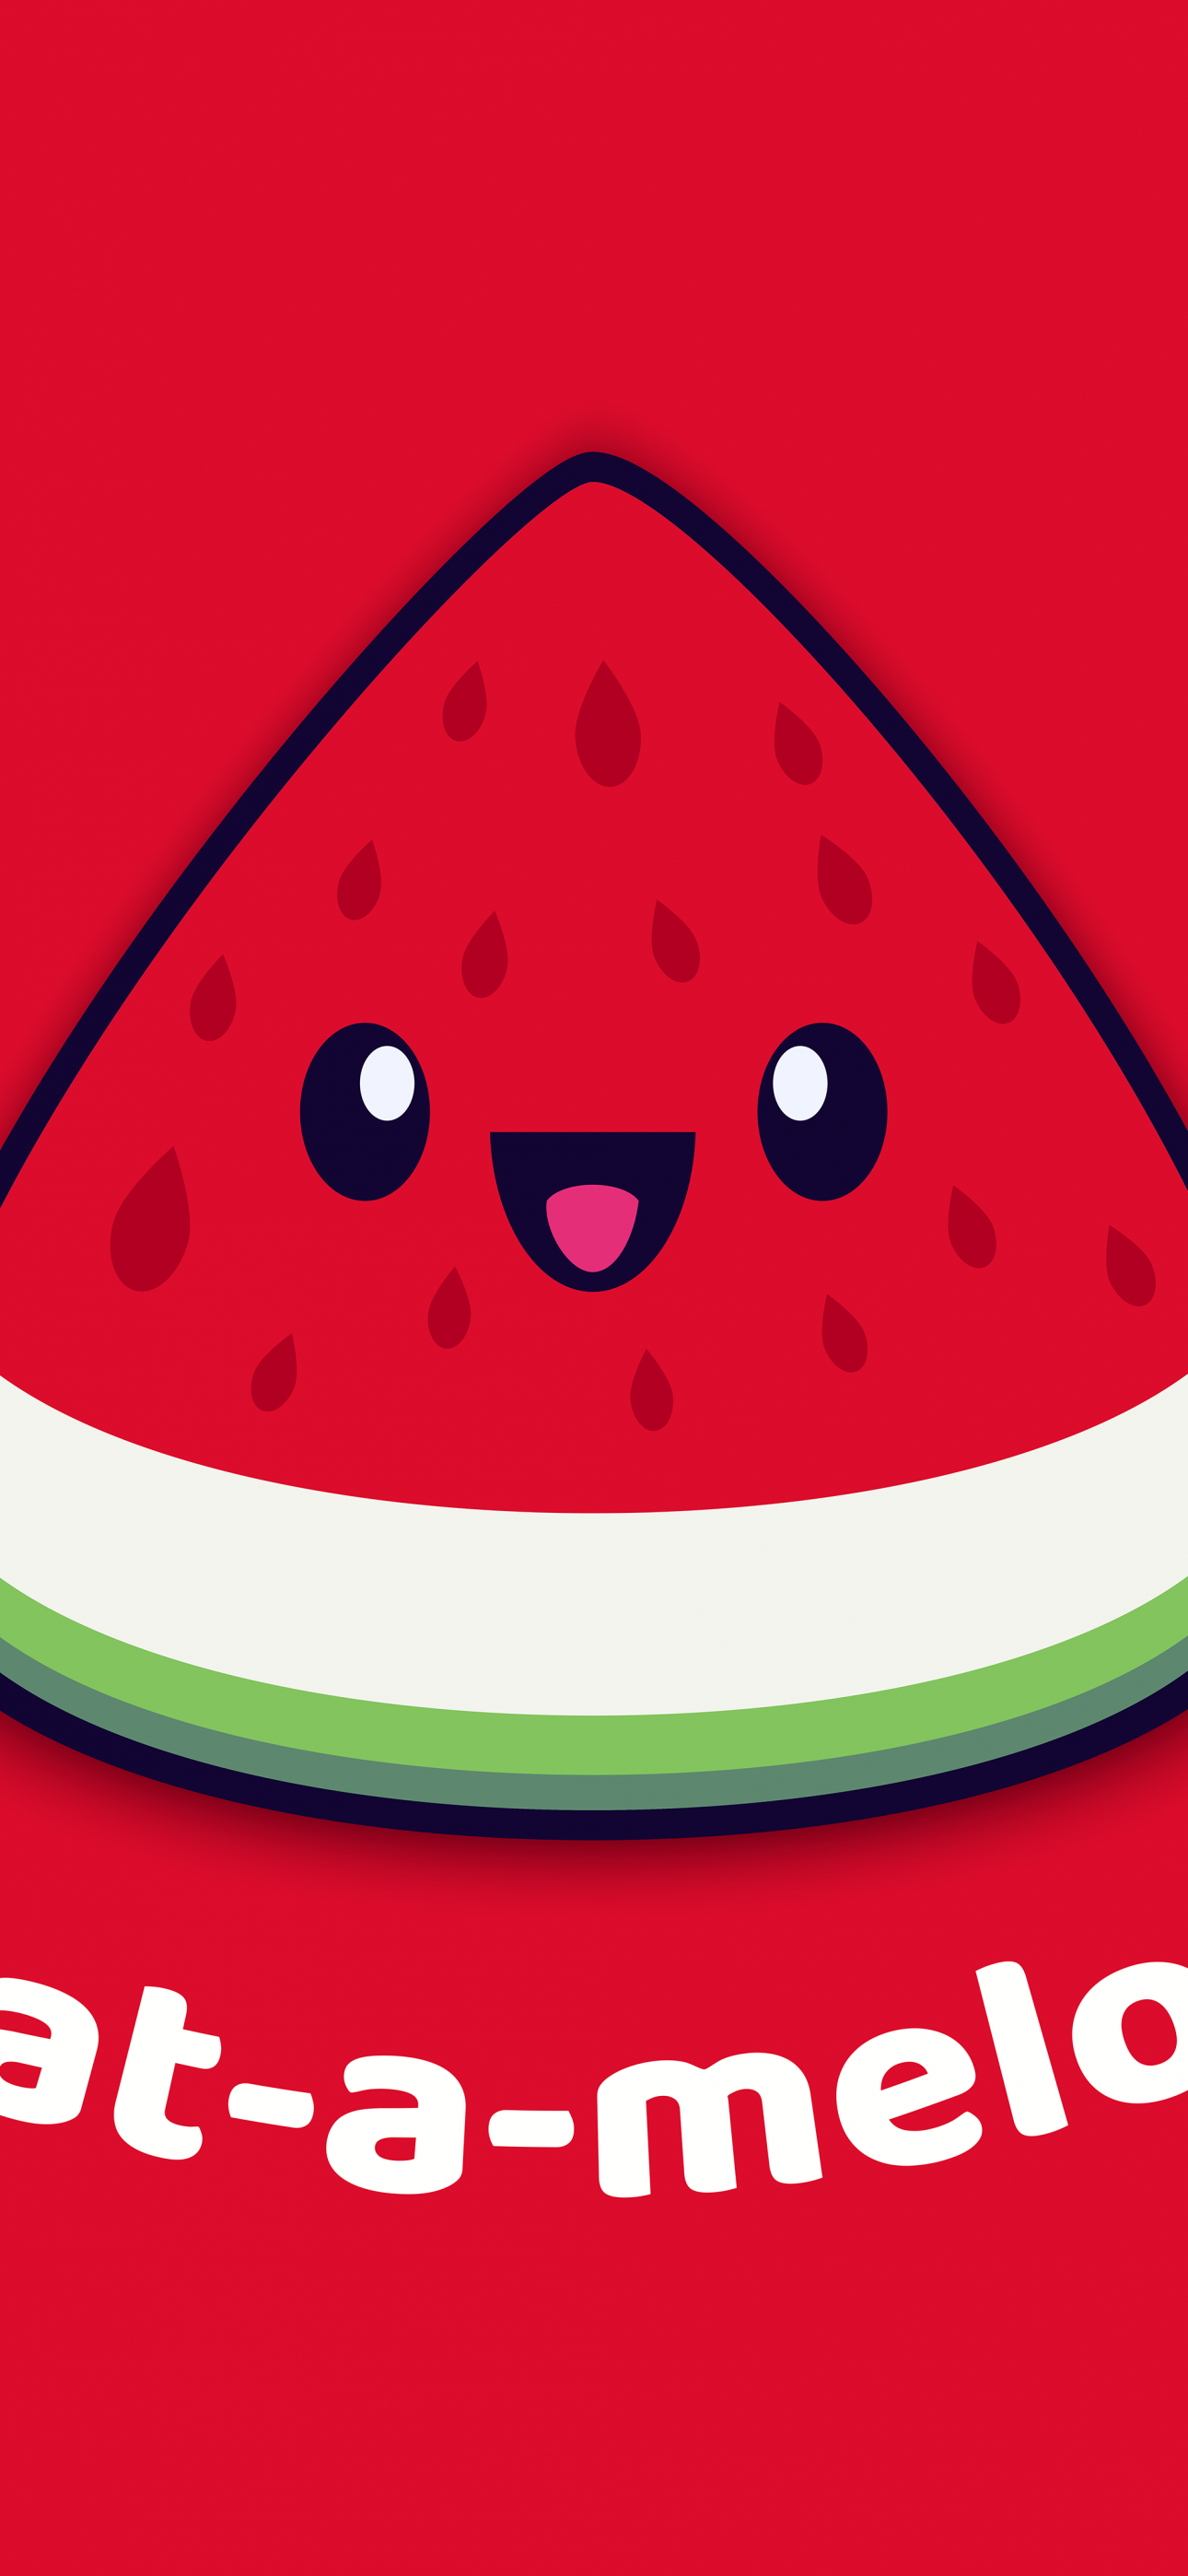 Watermelon wallpaper by Lovely_nature_27 - Download on ZEDGE™ | d2b8